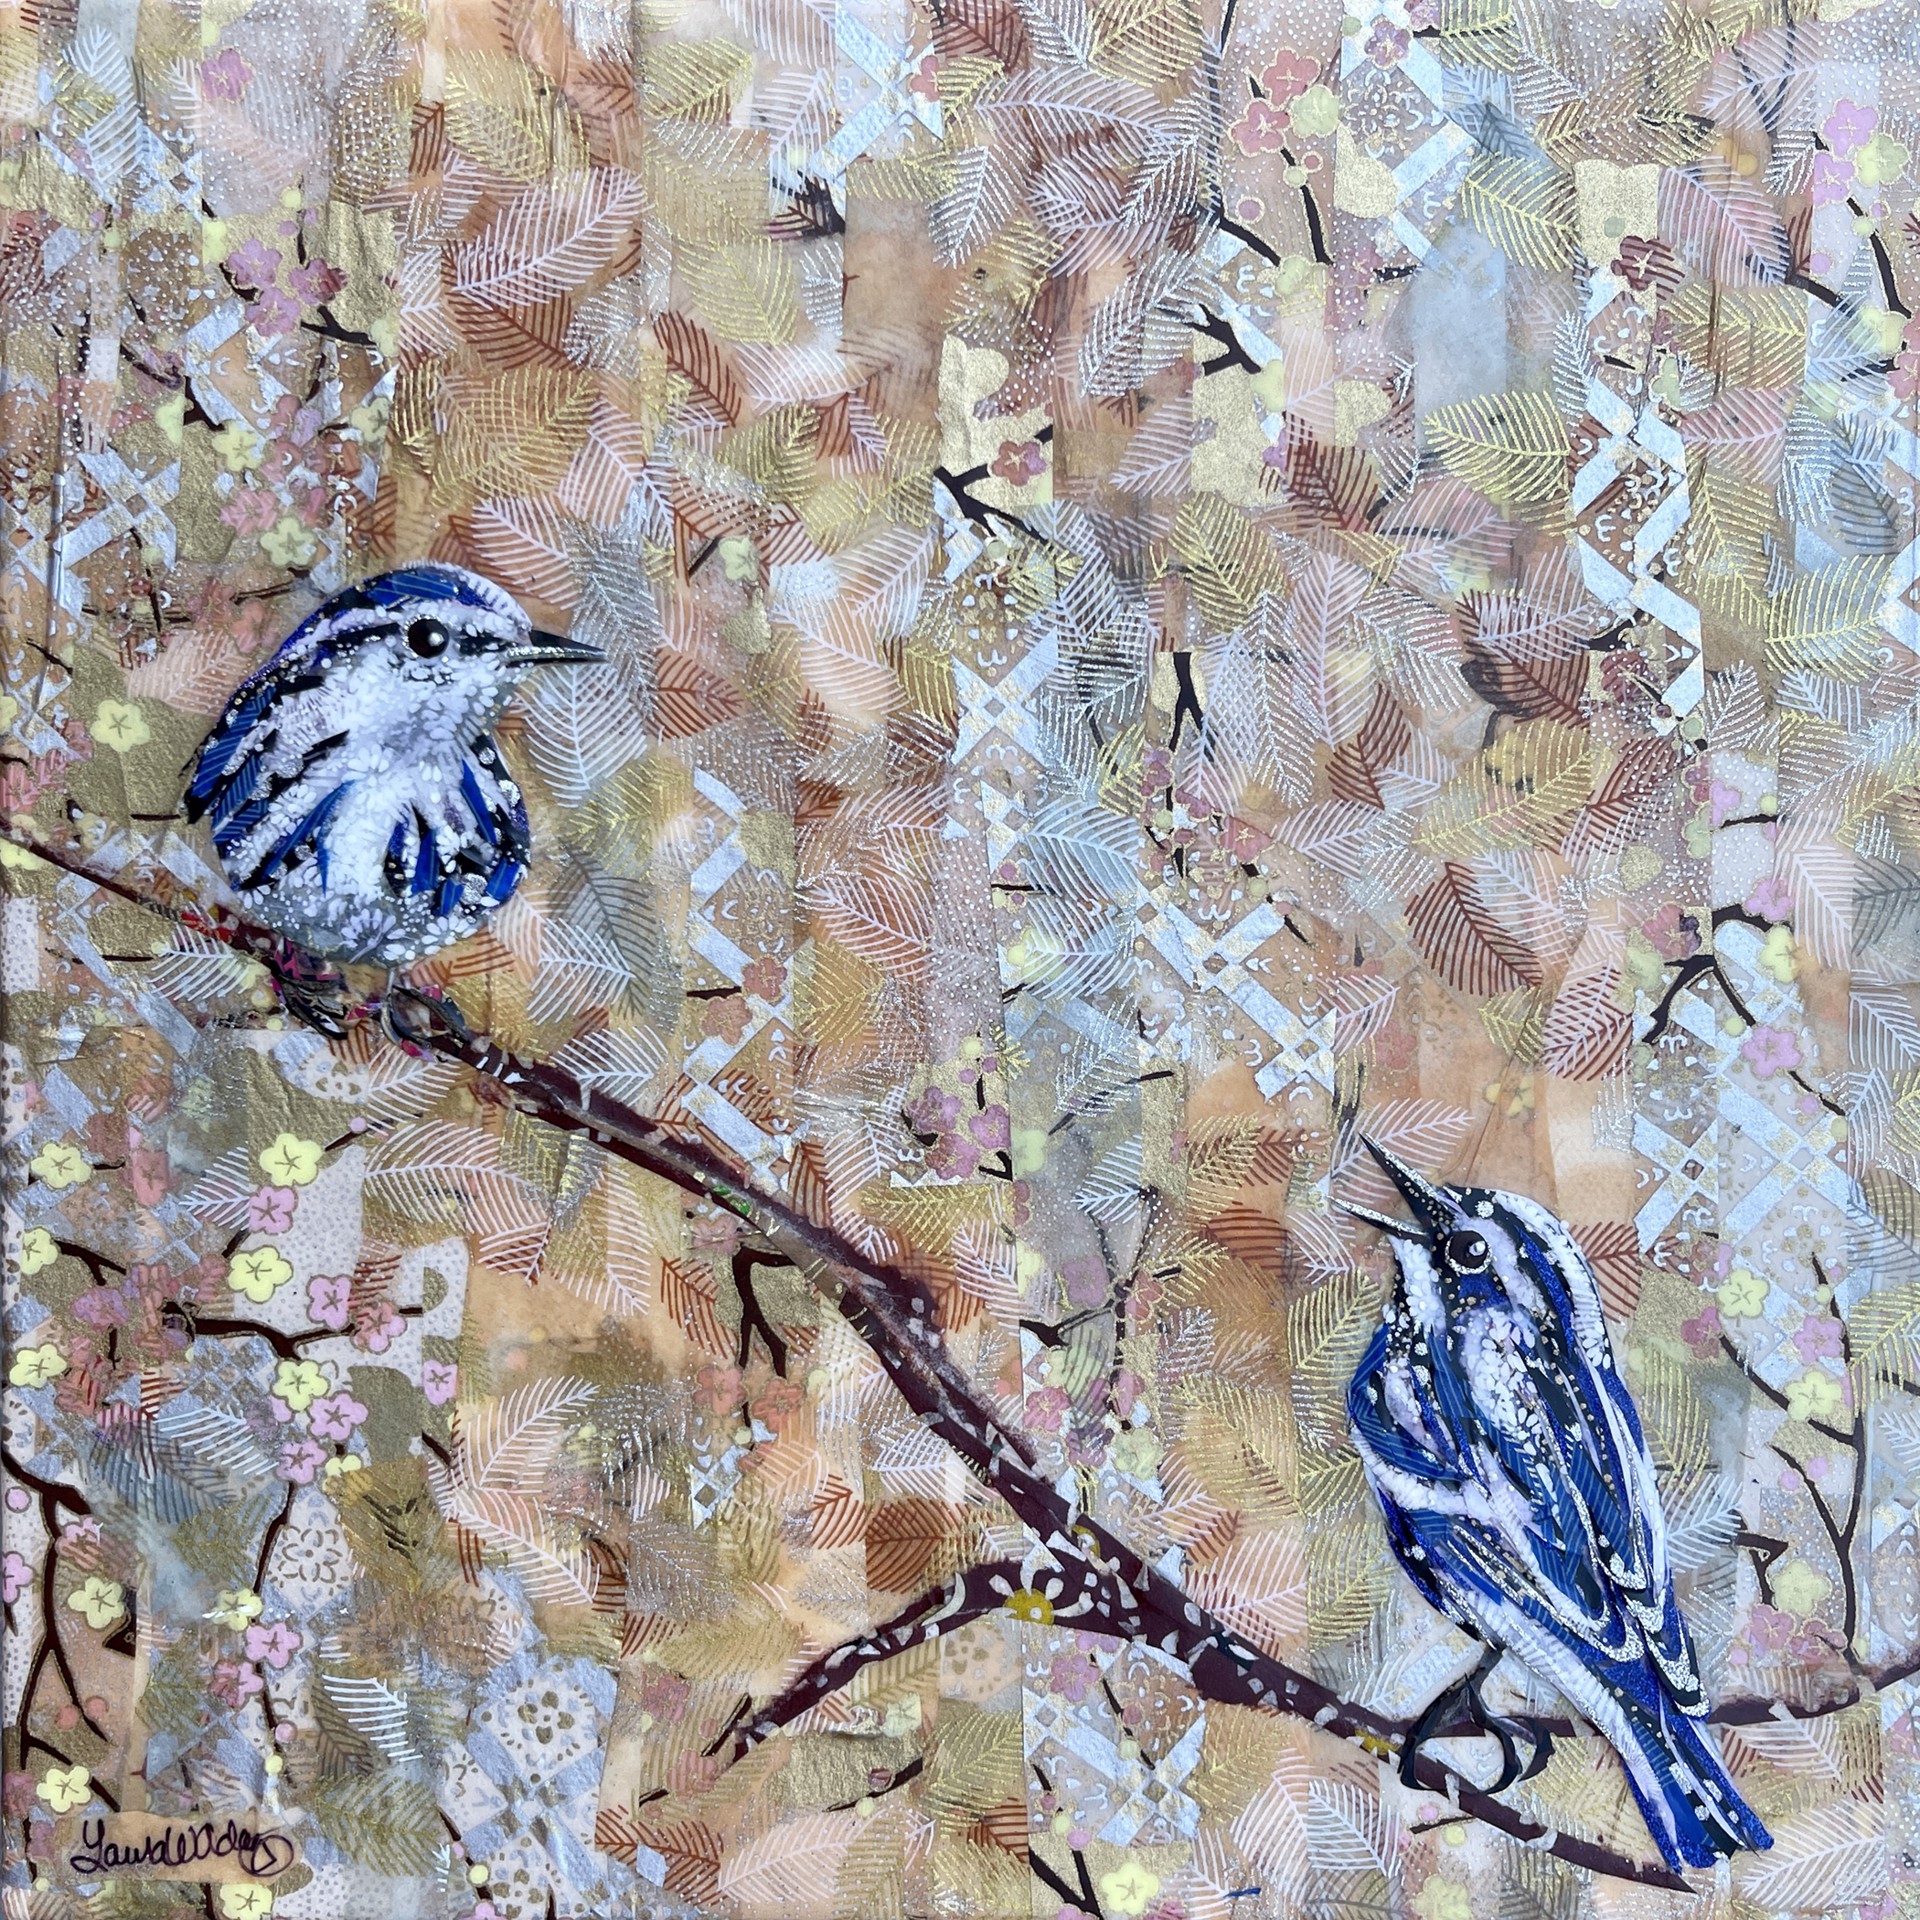 Black and White Warblers - SOLD! by Laura Adams